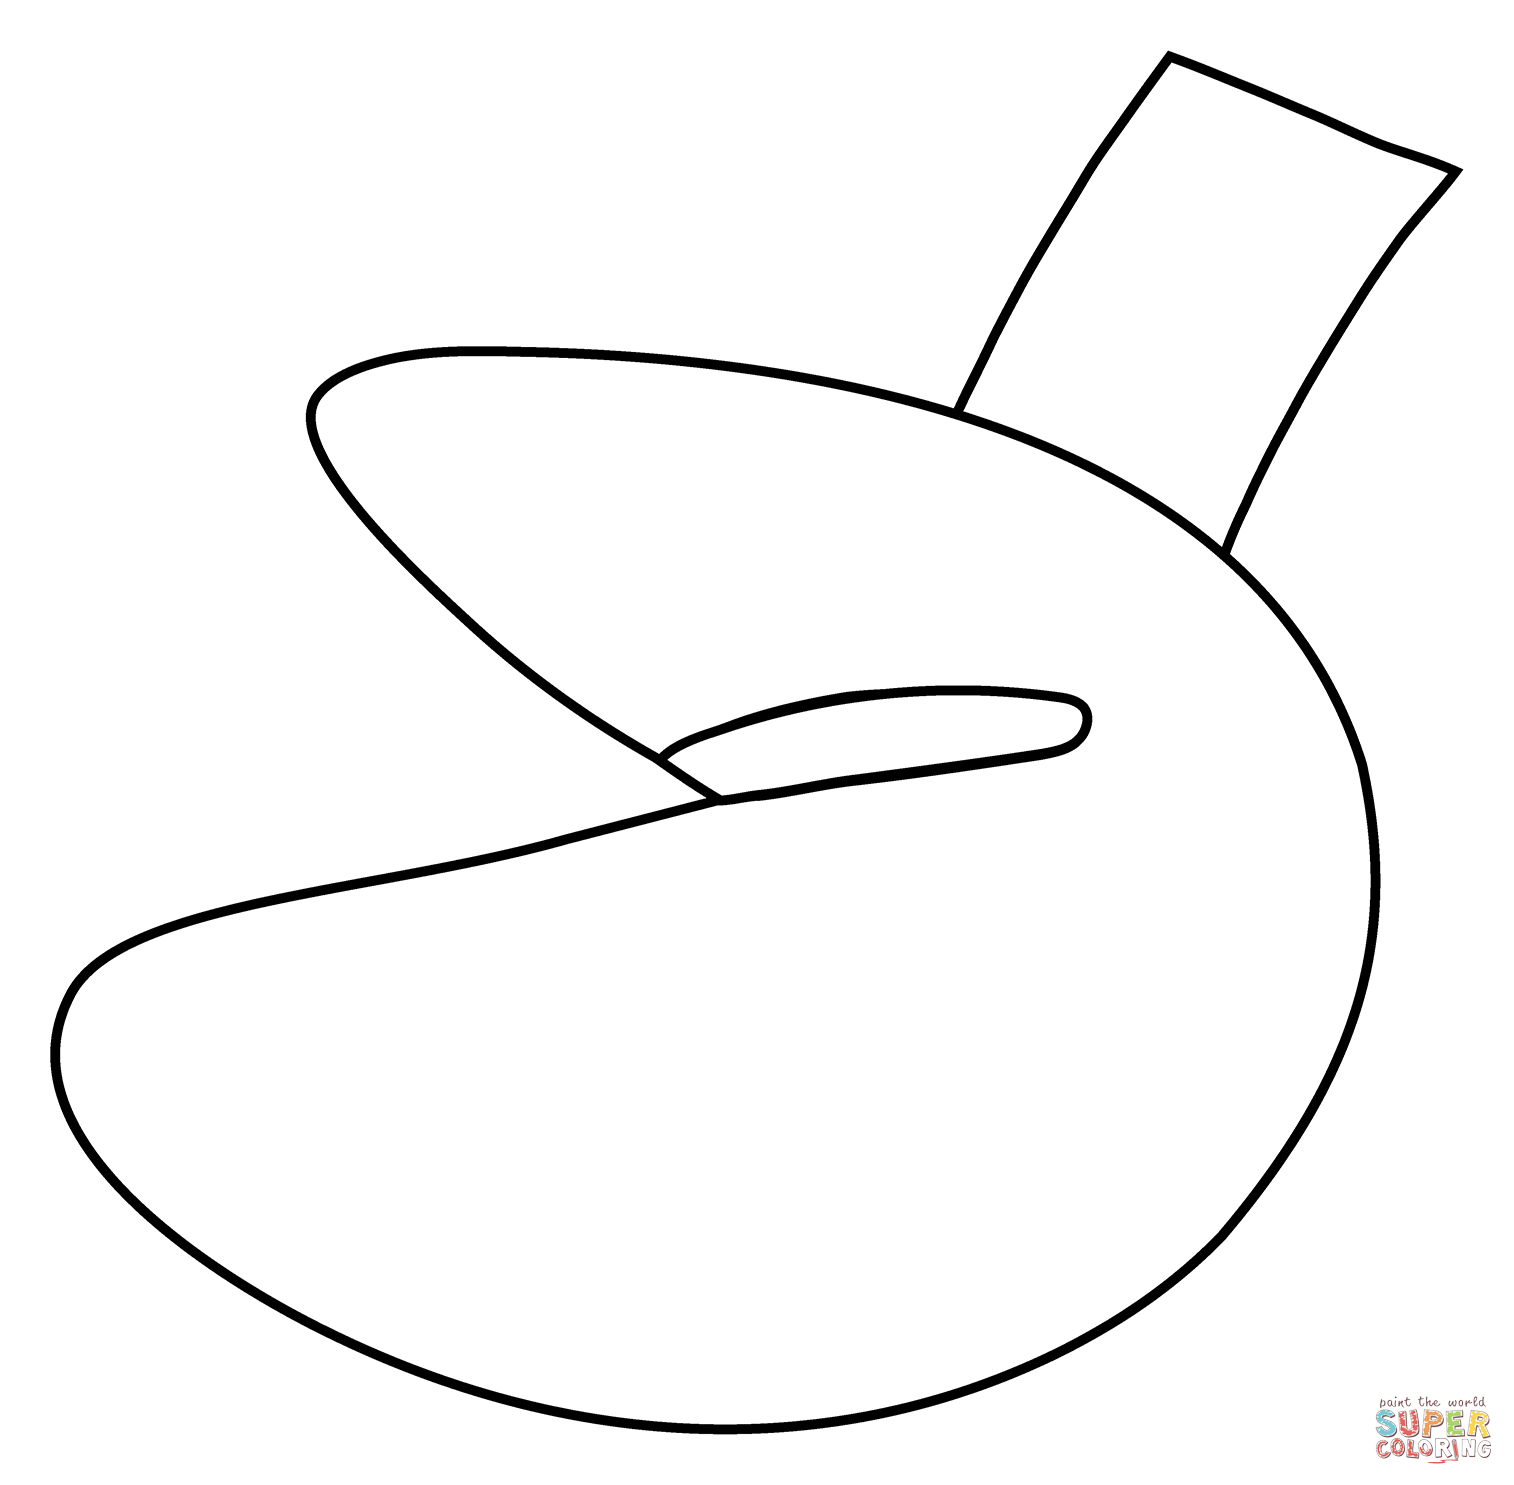 Fortune cookie emoji coloring page free printable coloring pages